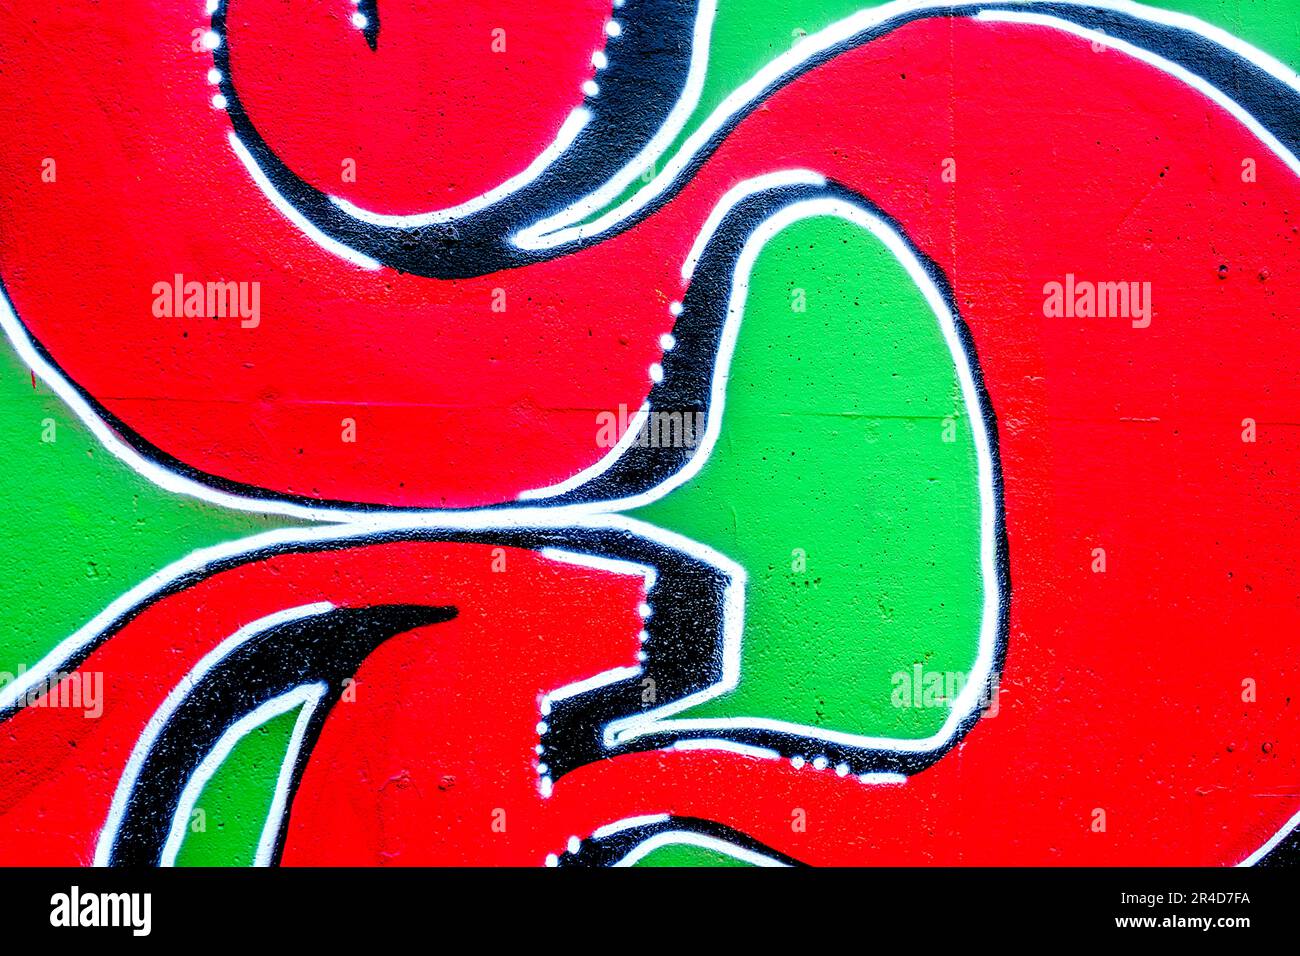 Stavanger, Rogaland, Norway, May 19 2023, Bright Colourful Wall Art Graffiti Art Work With No People Stock Photo